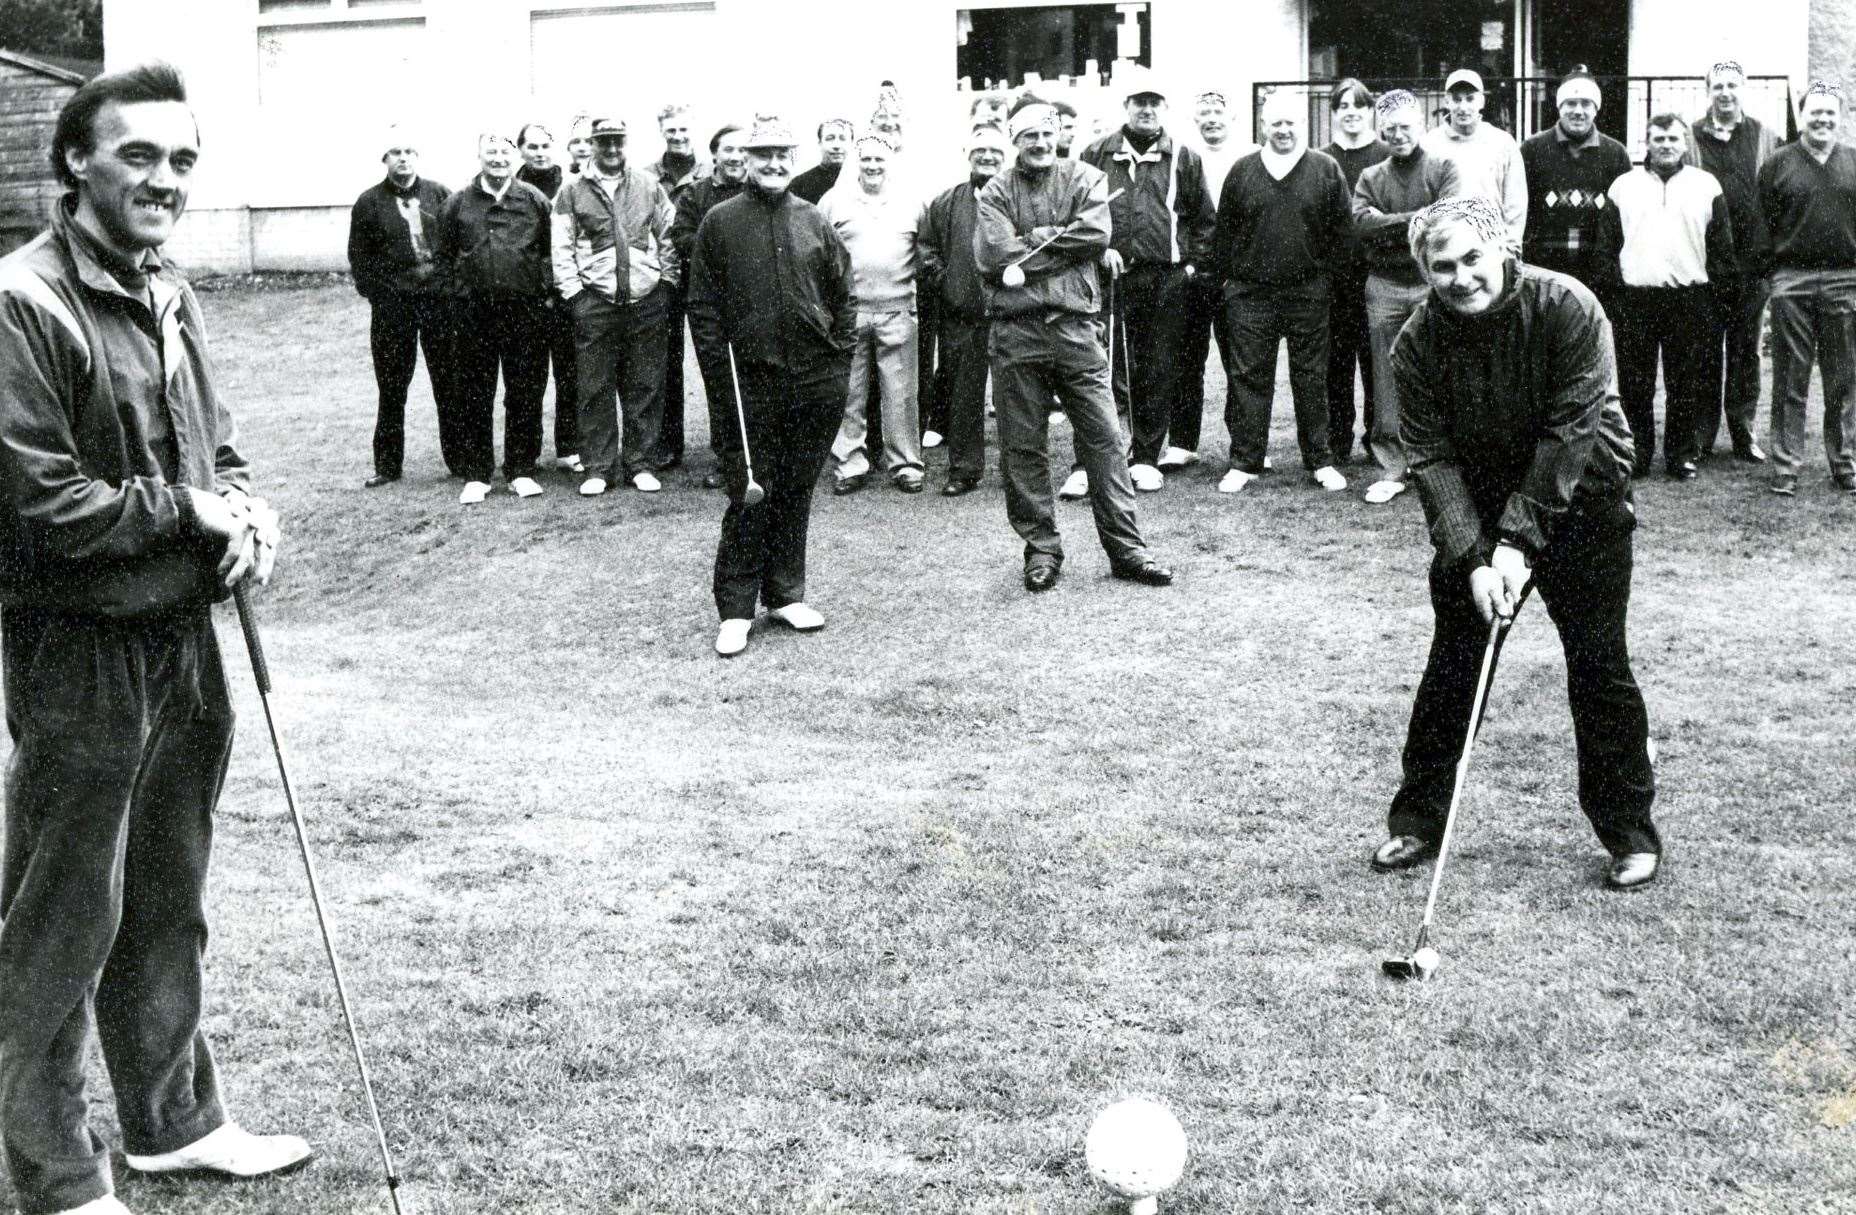 The 1st tee at Forres Golf Club, March 1995.